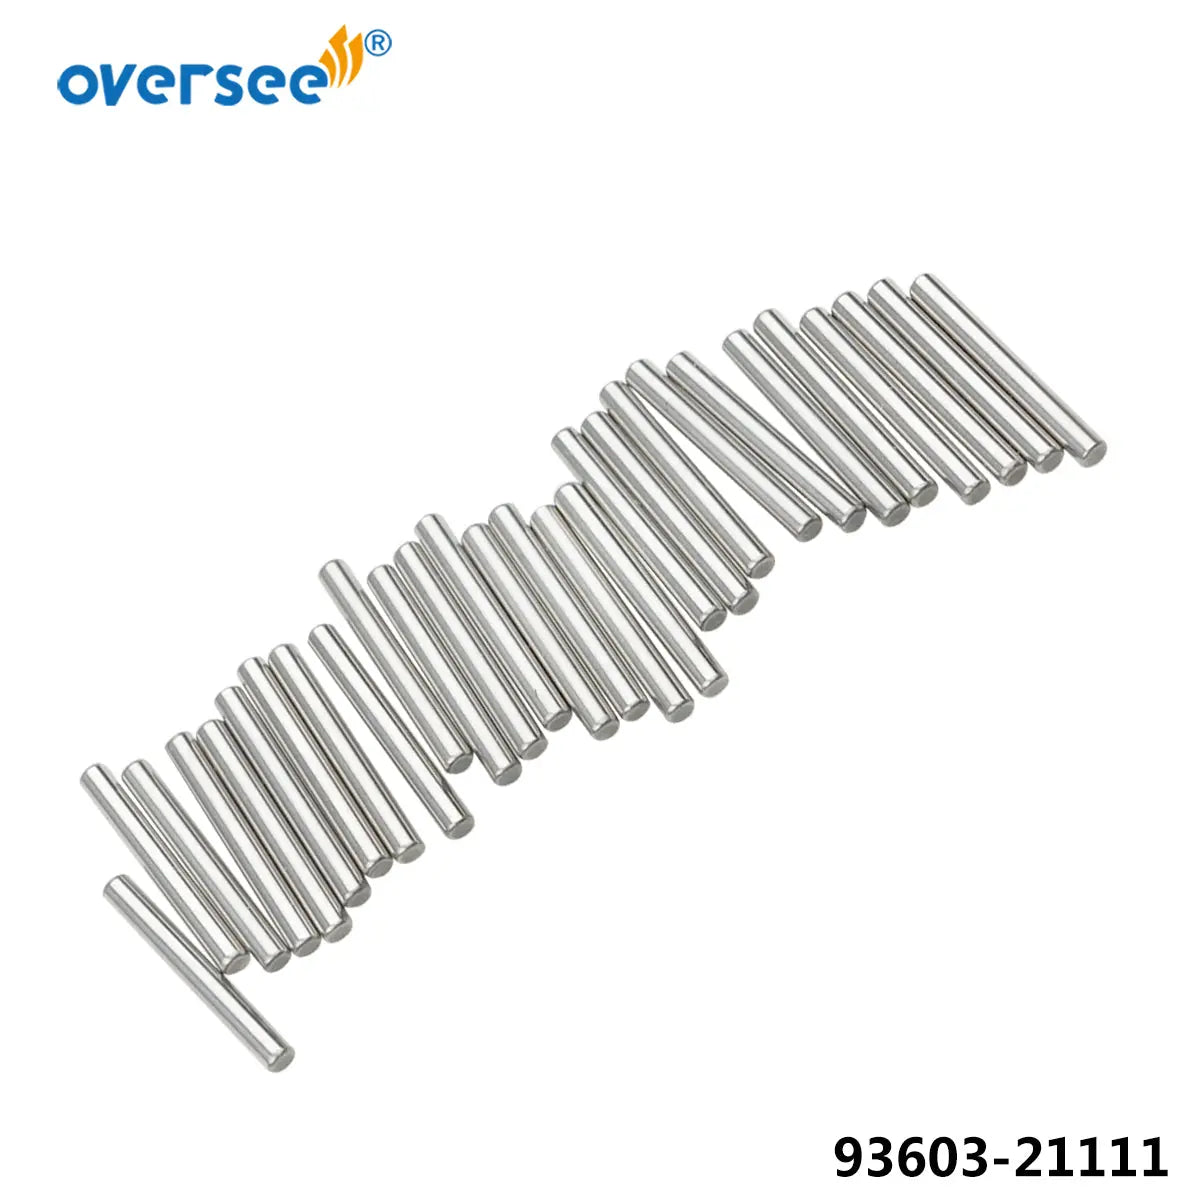 Oversee Marine 93603-21111-00 Bearing Needle 28pcs/Pack Replacement For Yamaha 85-90-115-130-150-175-200-225HP 2 Stroke Outboard Engine Top Real